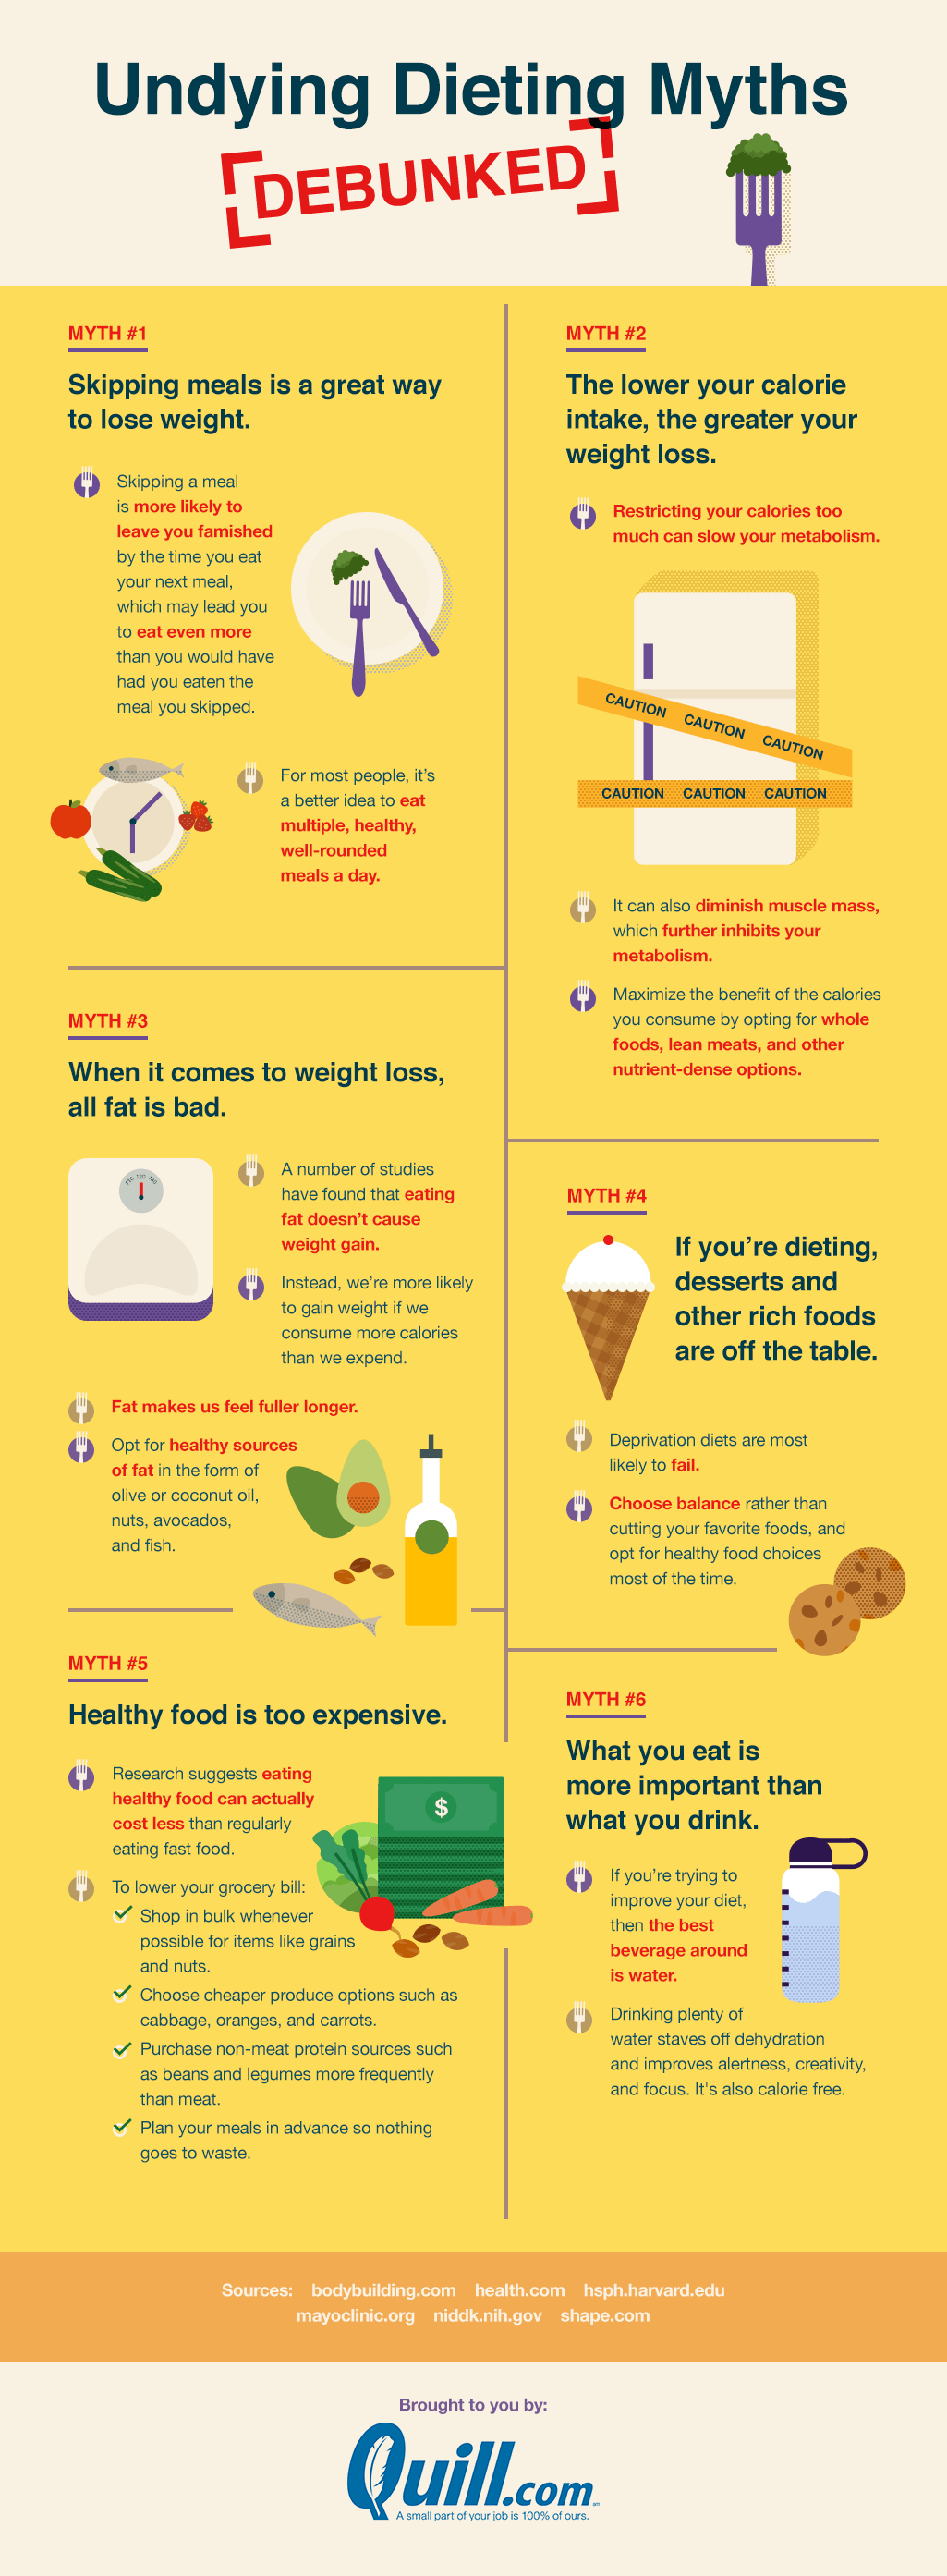 Undying-Dieting-Myths-Infographic-2a